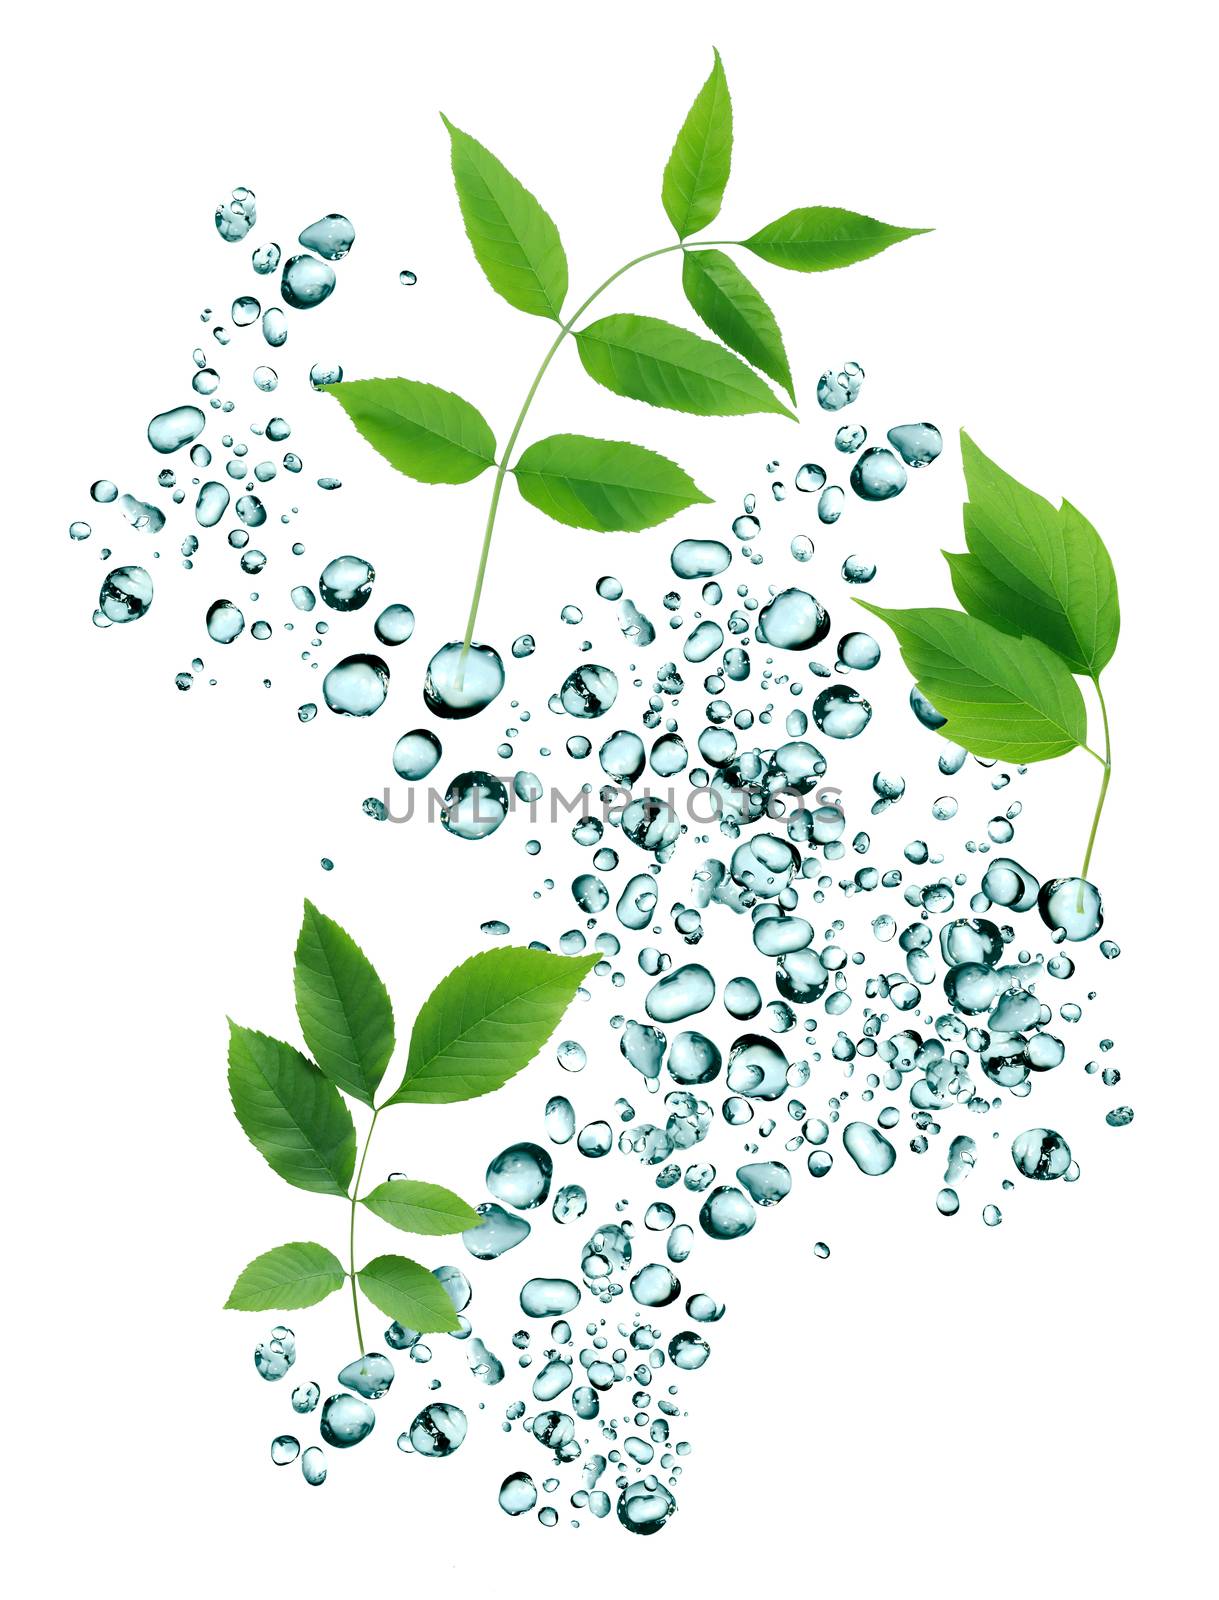 Summer rain concept. Freshness green leaves on background with water drops